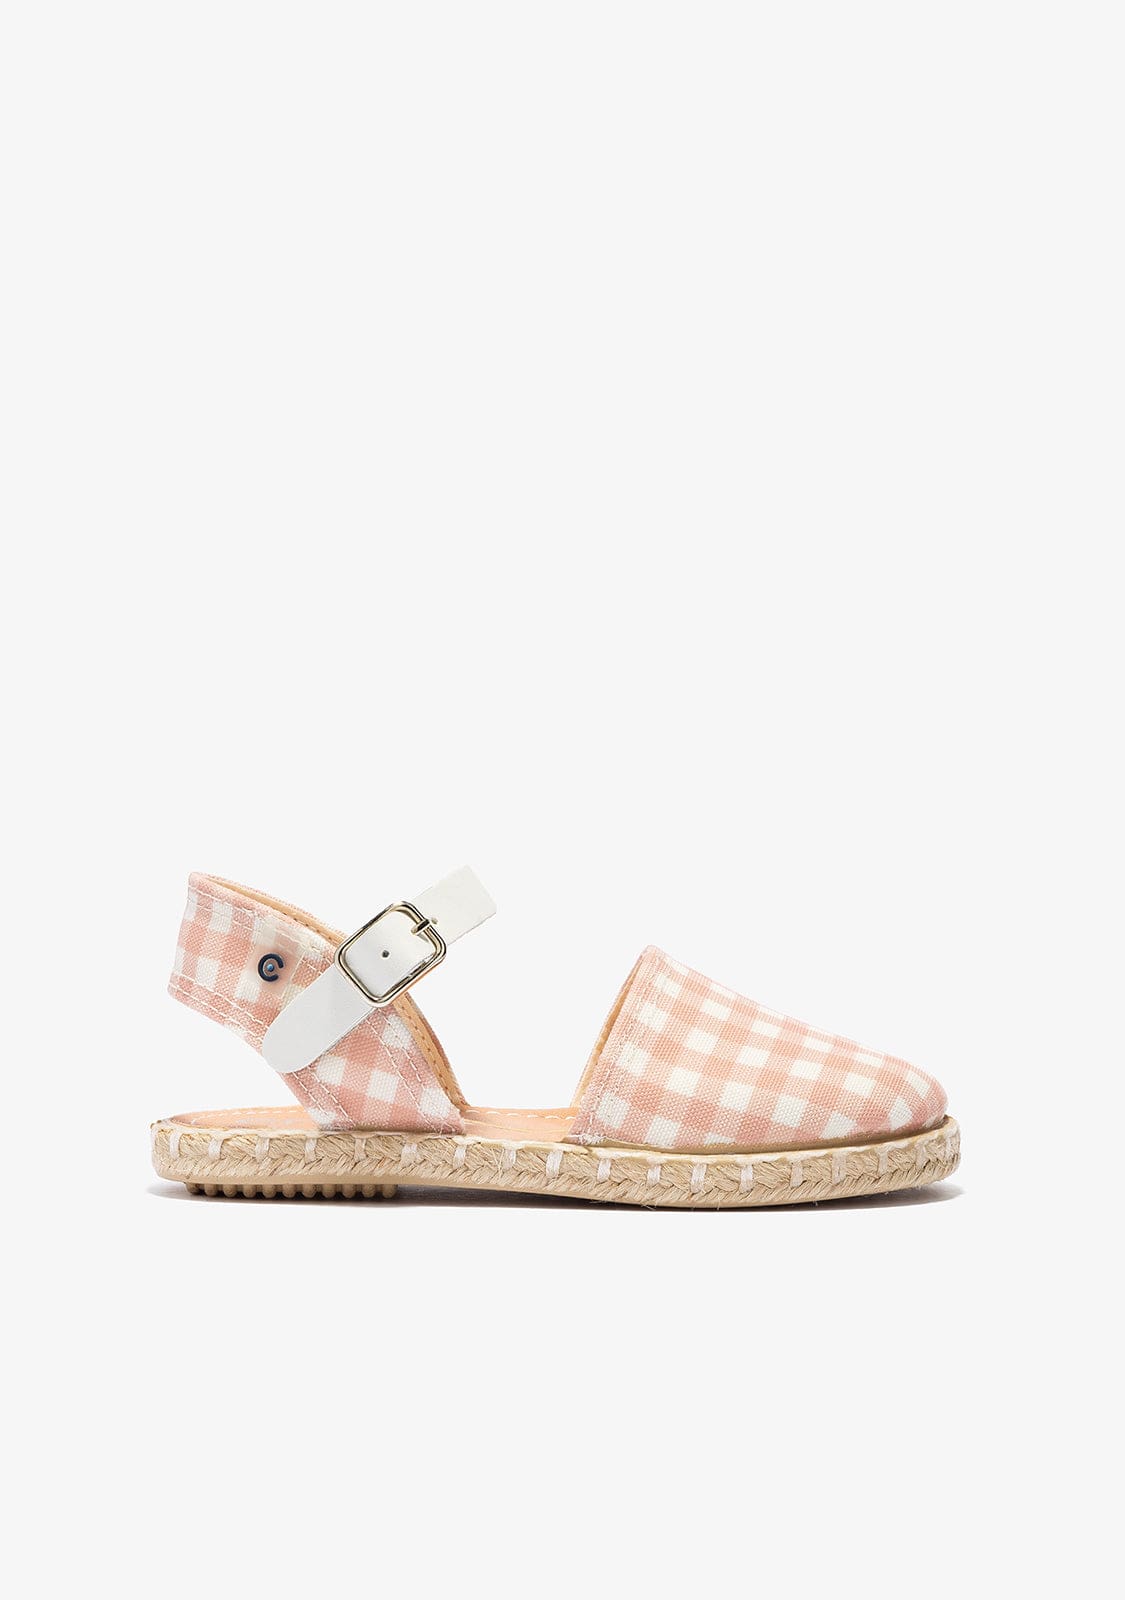 CONGUITOS Shoes Girl's Pink Vichy Espadrilles